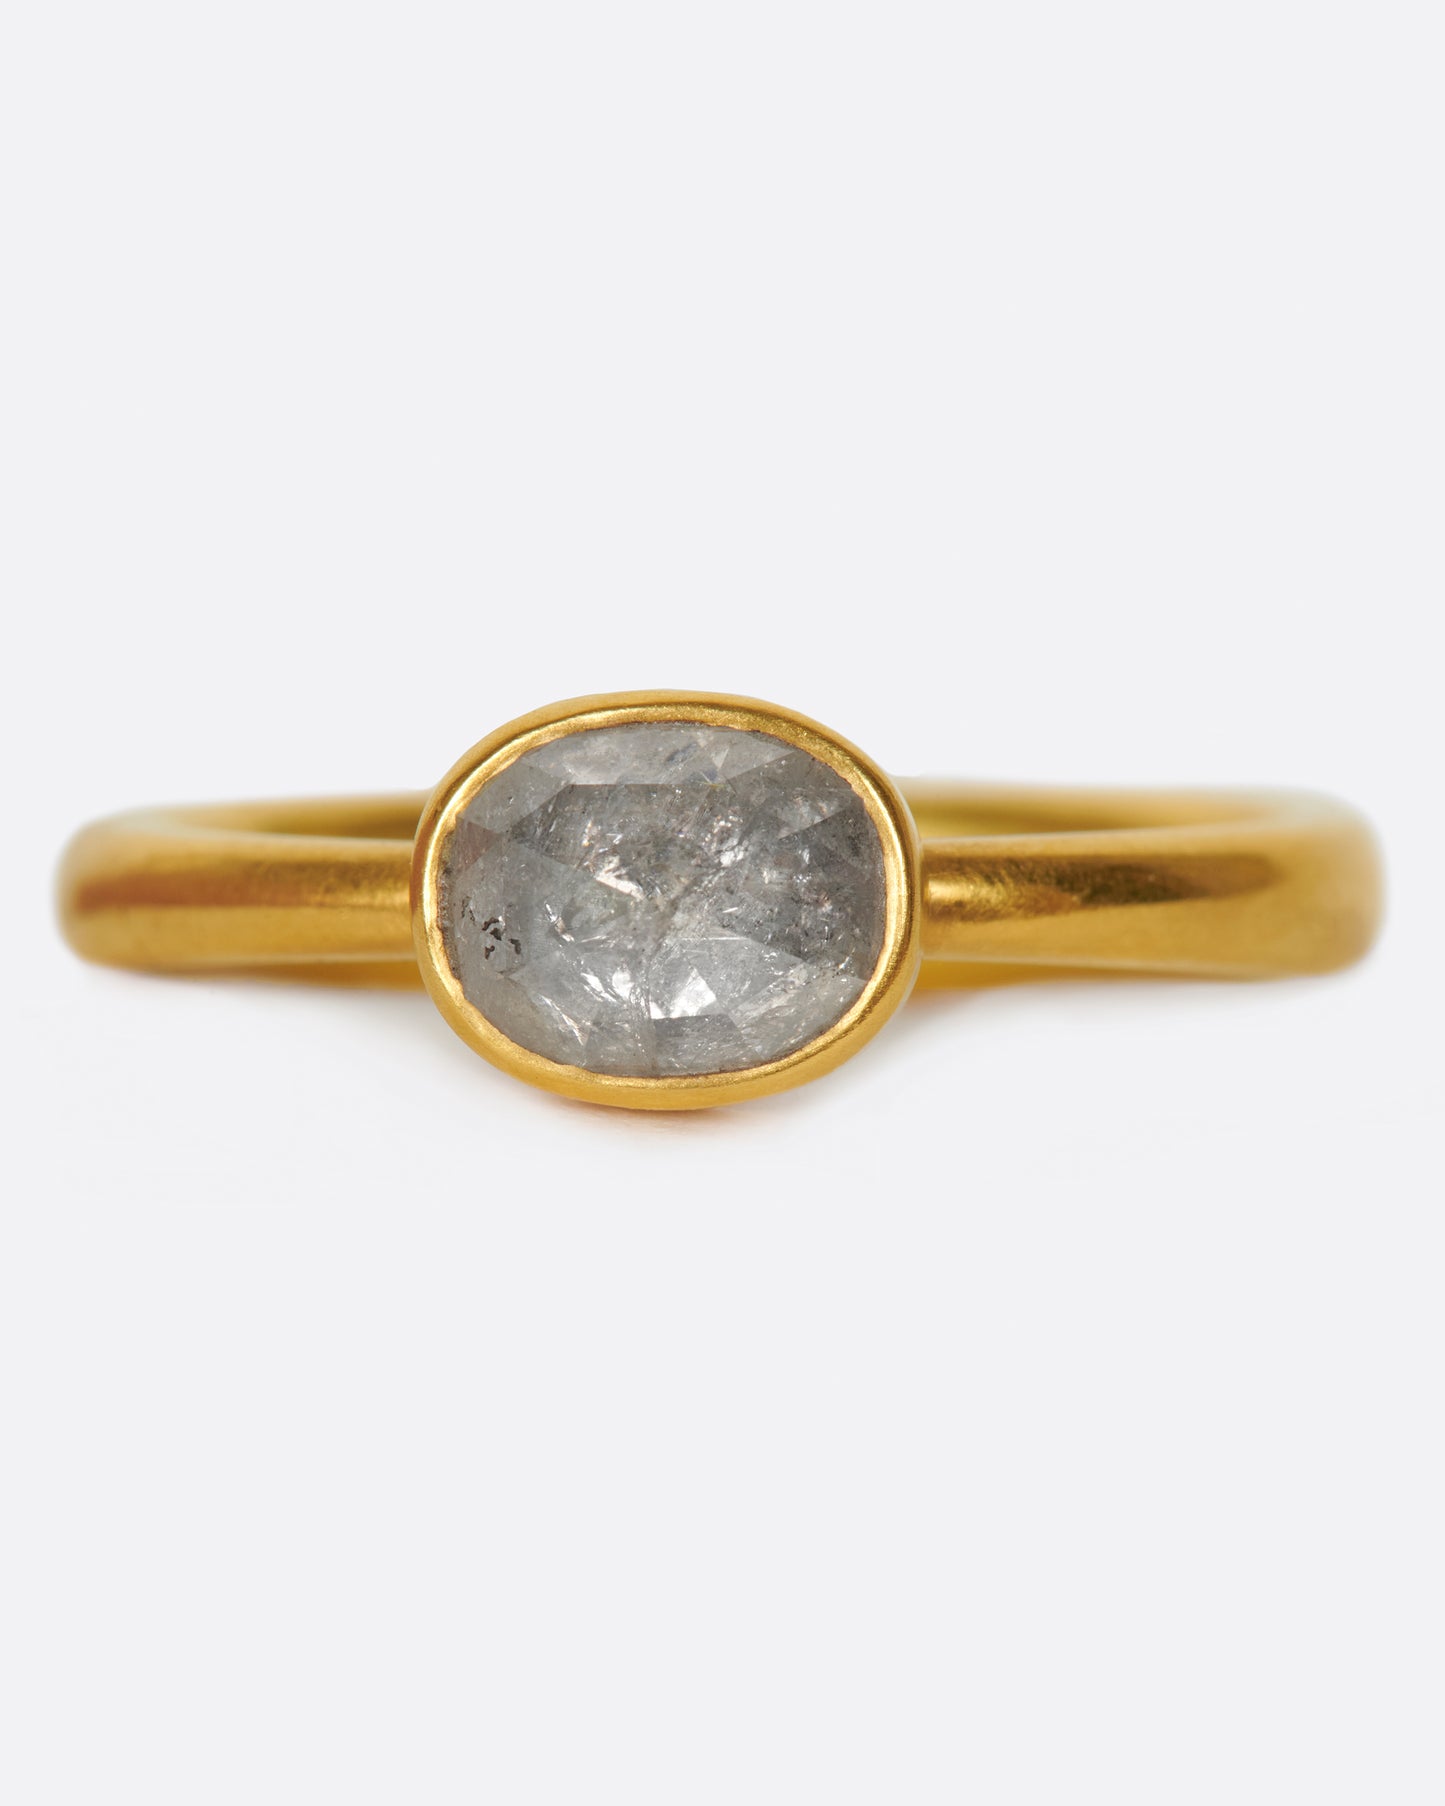 A pale grey, rose cut, oval diamond. Set horizontally on a simple, solid gold band, for a comfortably luxurious and unique design.